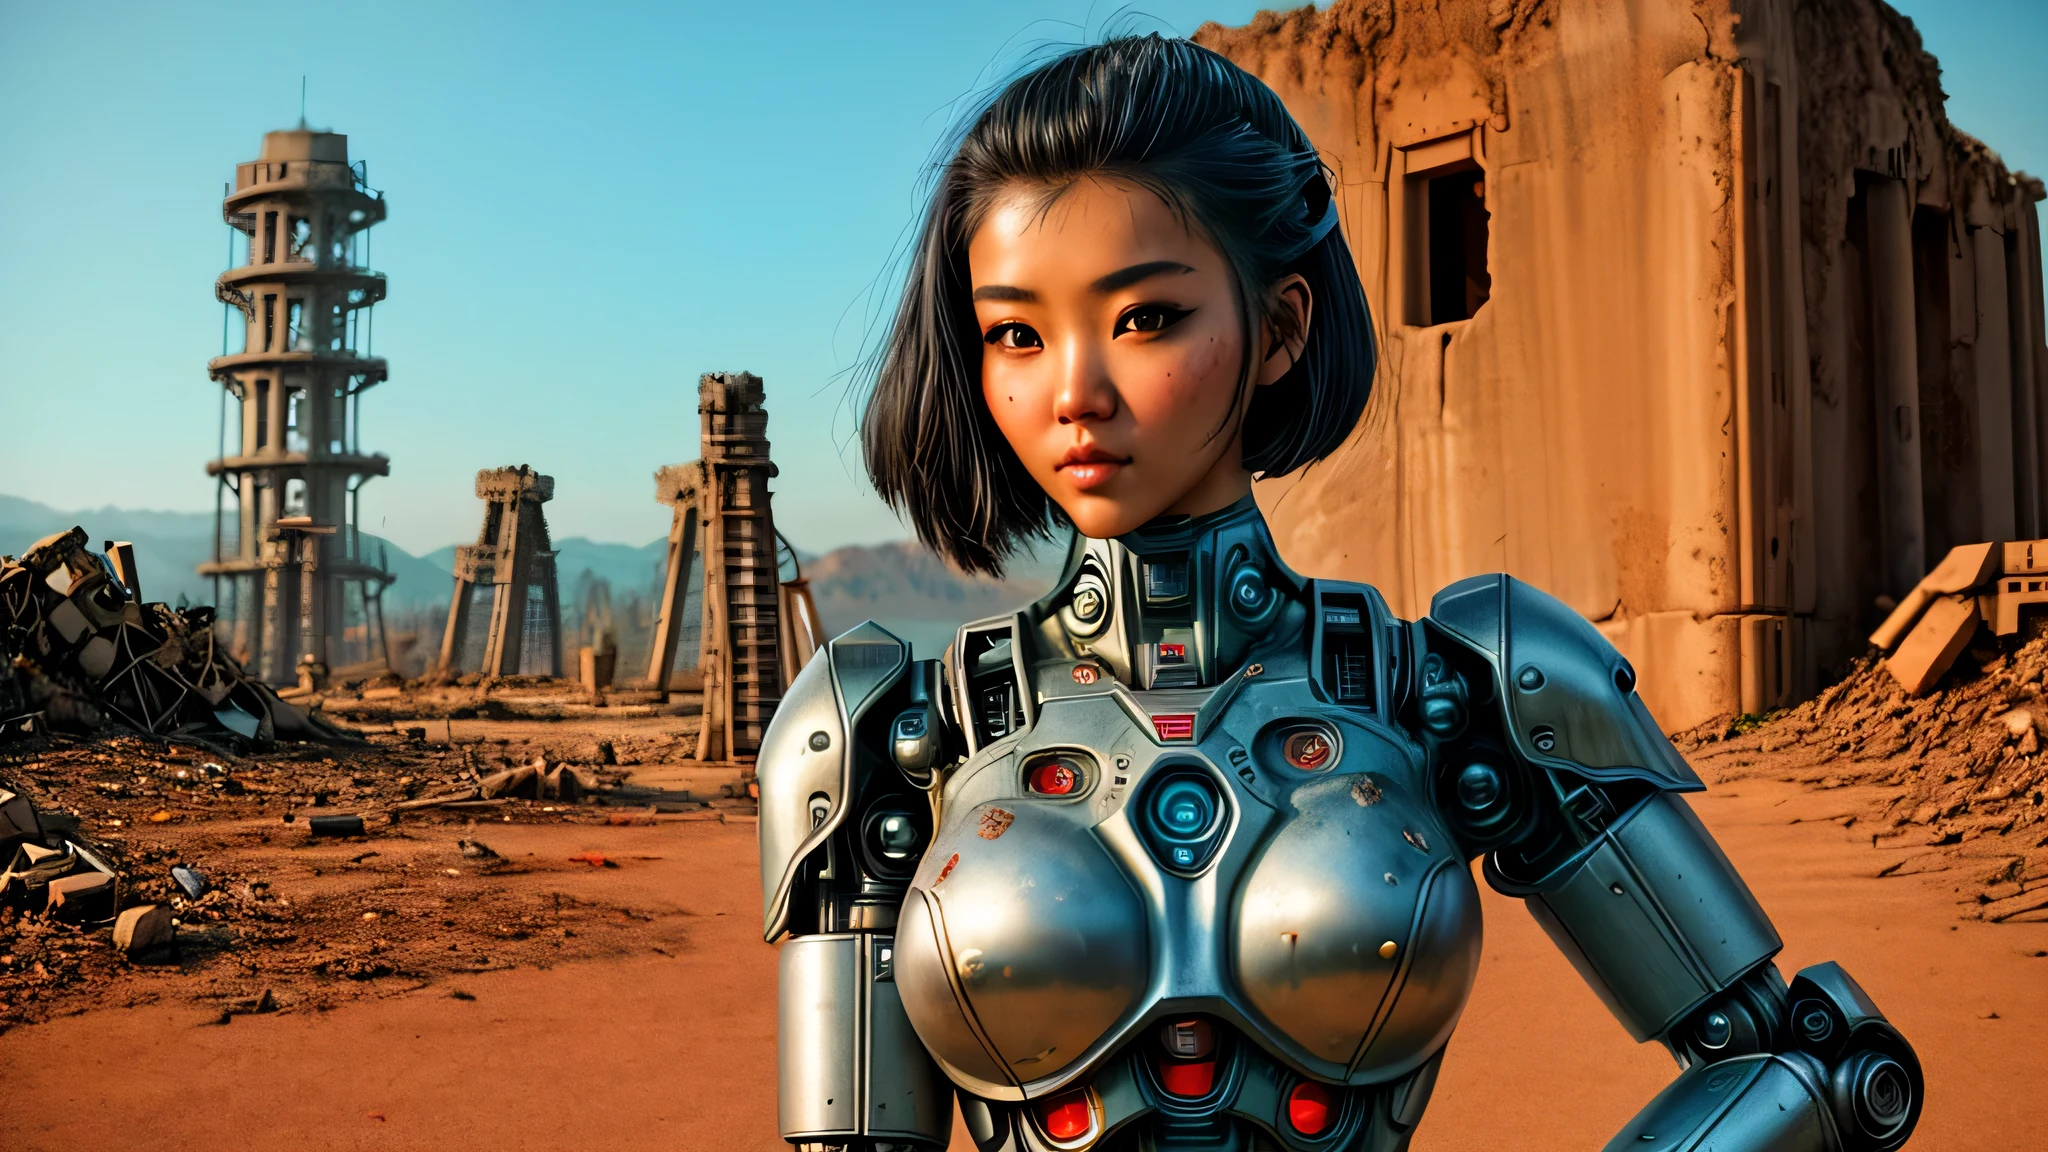 There is a woman in robot suit posing next to ancient ruin, in the apocalypse world  of fallout, beautiful asian girl half-cyborg, cute cyborg girl, beautiful girl cyborg, perfect robot girl, cyborg girl, young cyborg lady, beautiful female robot, beautiful robot woman, cyborg-girl, perfect cyborg female, porcelain cyborg, female robot, beautiful cyborg image